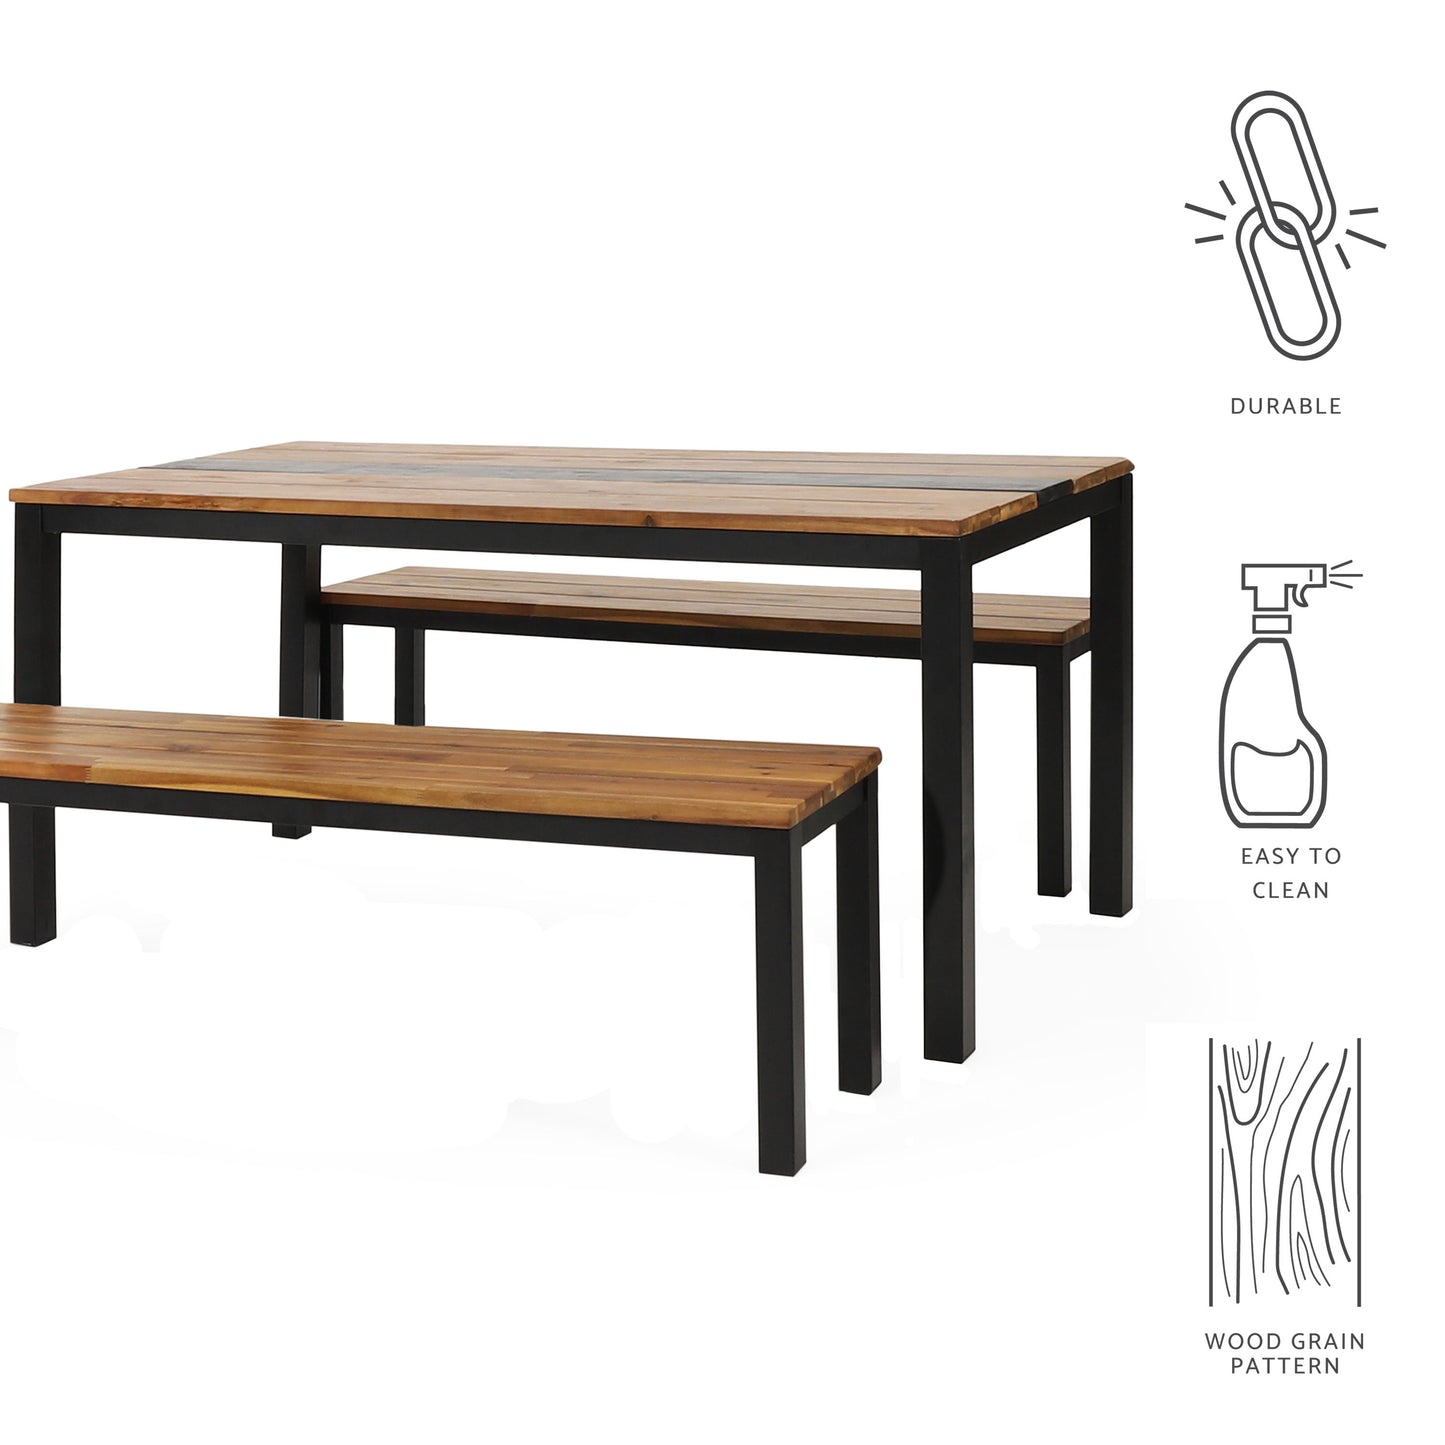 Colcord Outdoor Modern Industrial Acacia Wood 3 Piece Picnic Set, Teak and Black